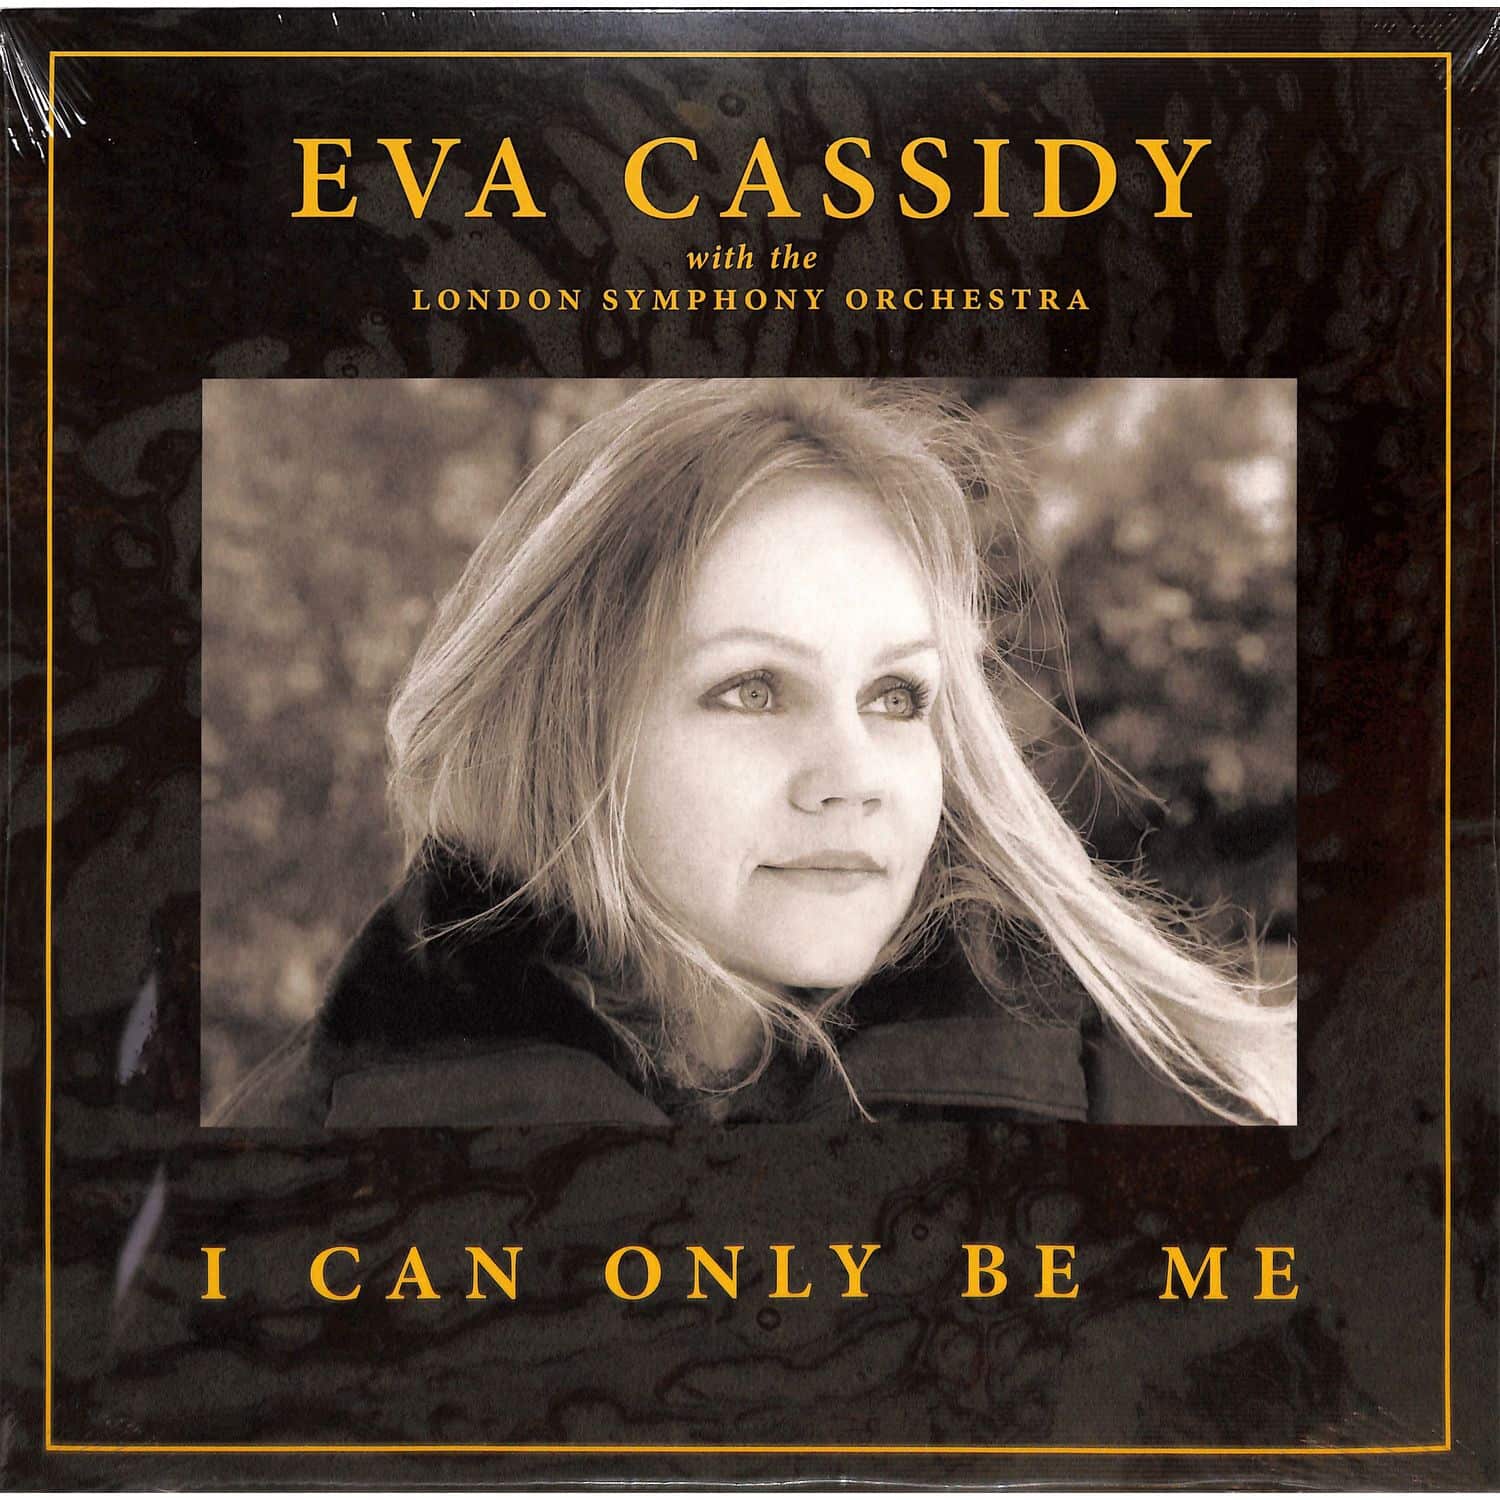 Eva Cassidy with the London Symphony Orchestra - I CAN ONLY BE ME 